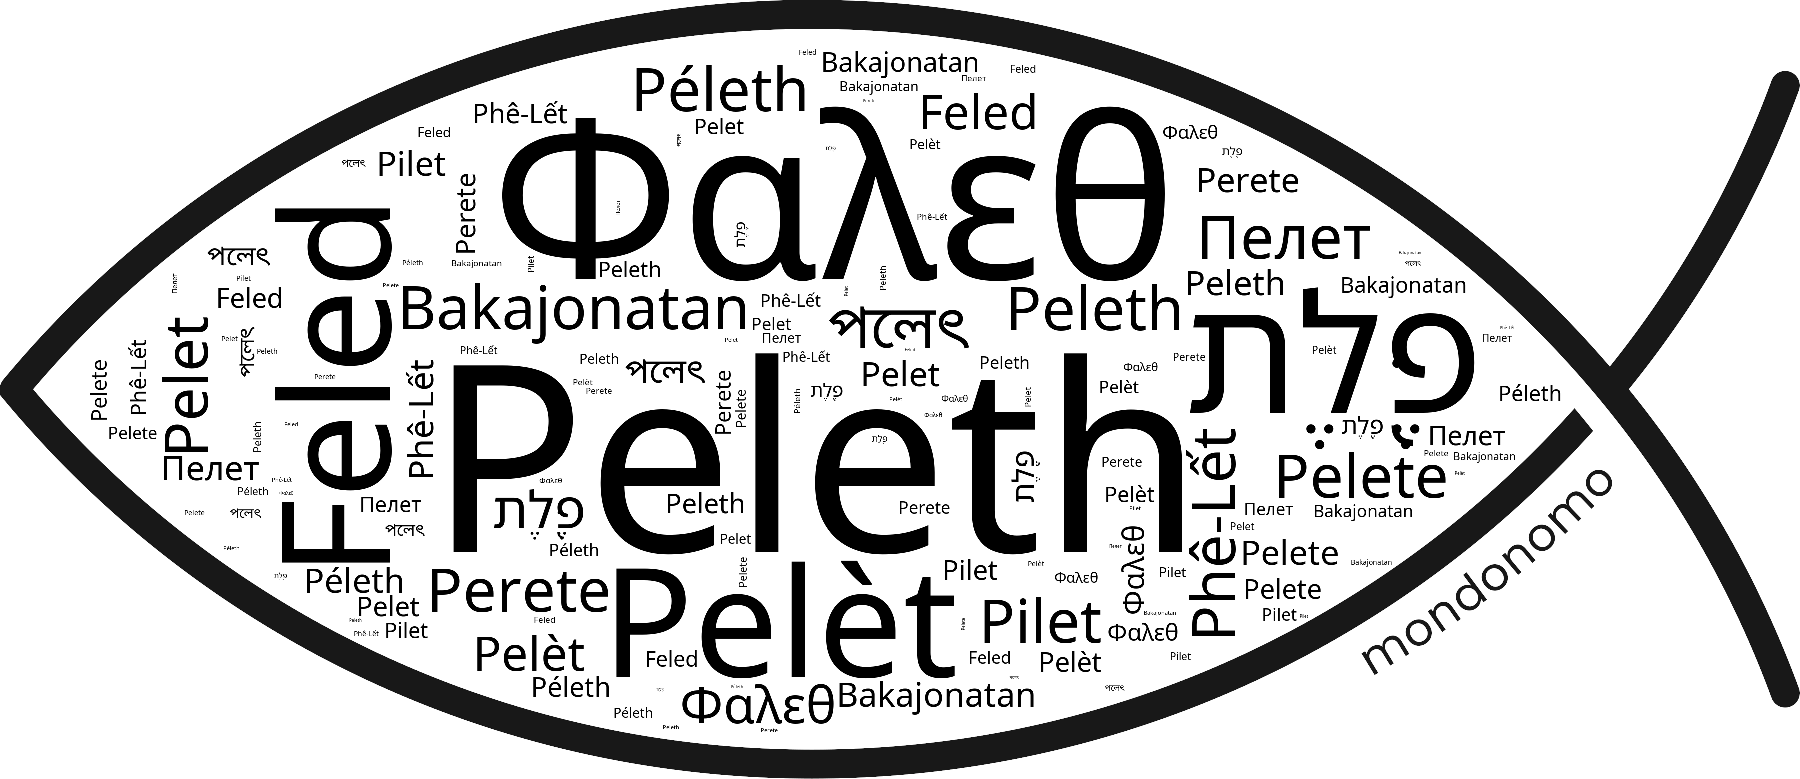 Name Peleth in the world's Bibles